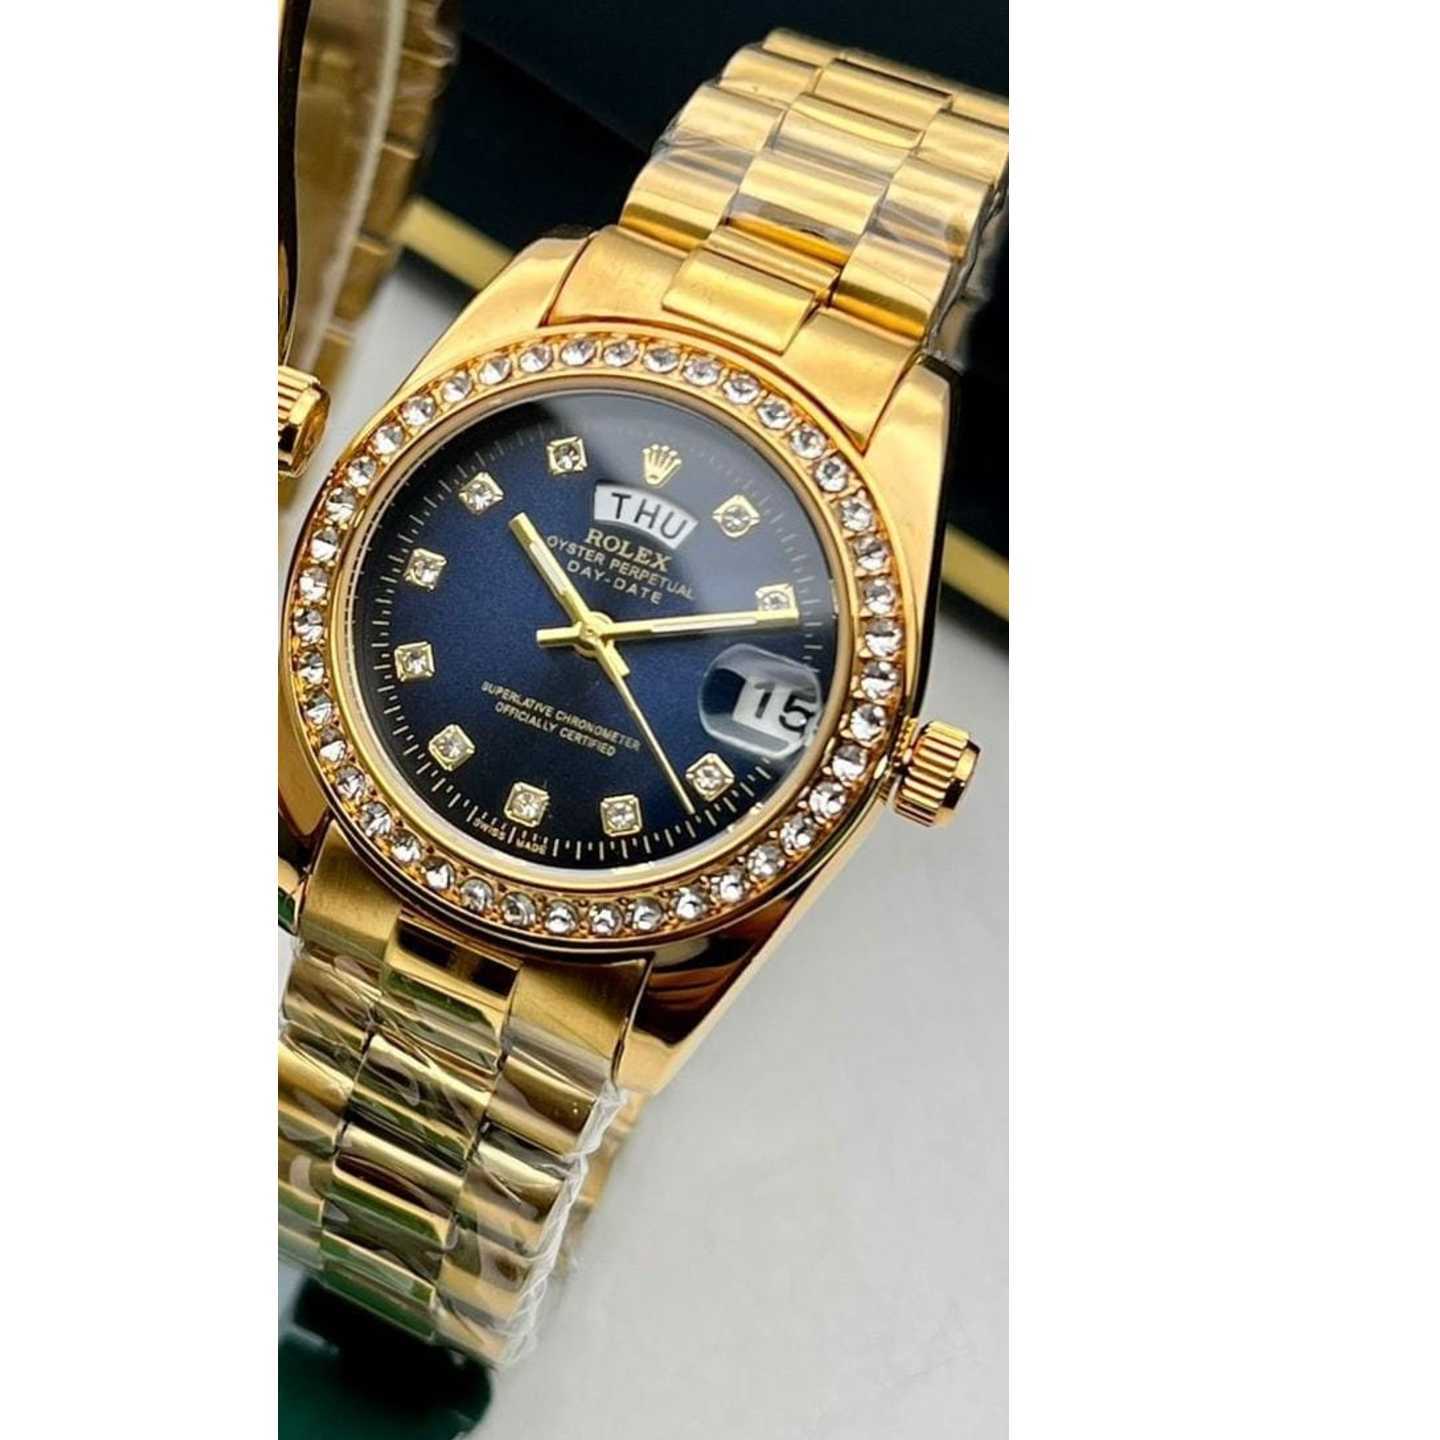 Ladies Rolex Watch Gift for Wedding , Engagement,anniversary, valentines day, mothers day for sister, wife,friend,mother, baby shower